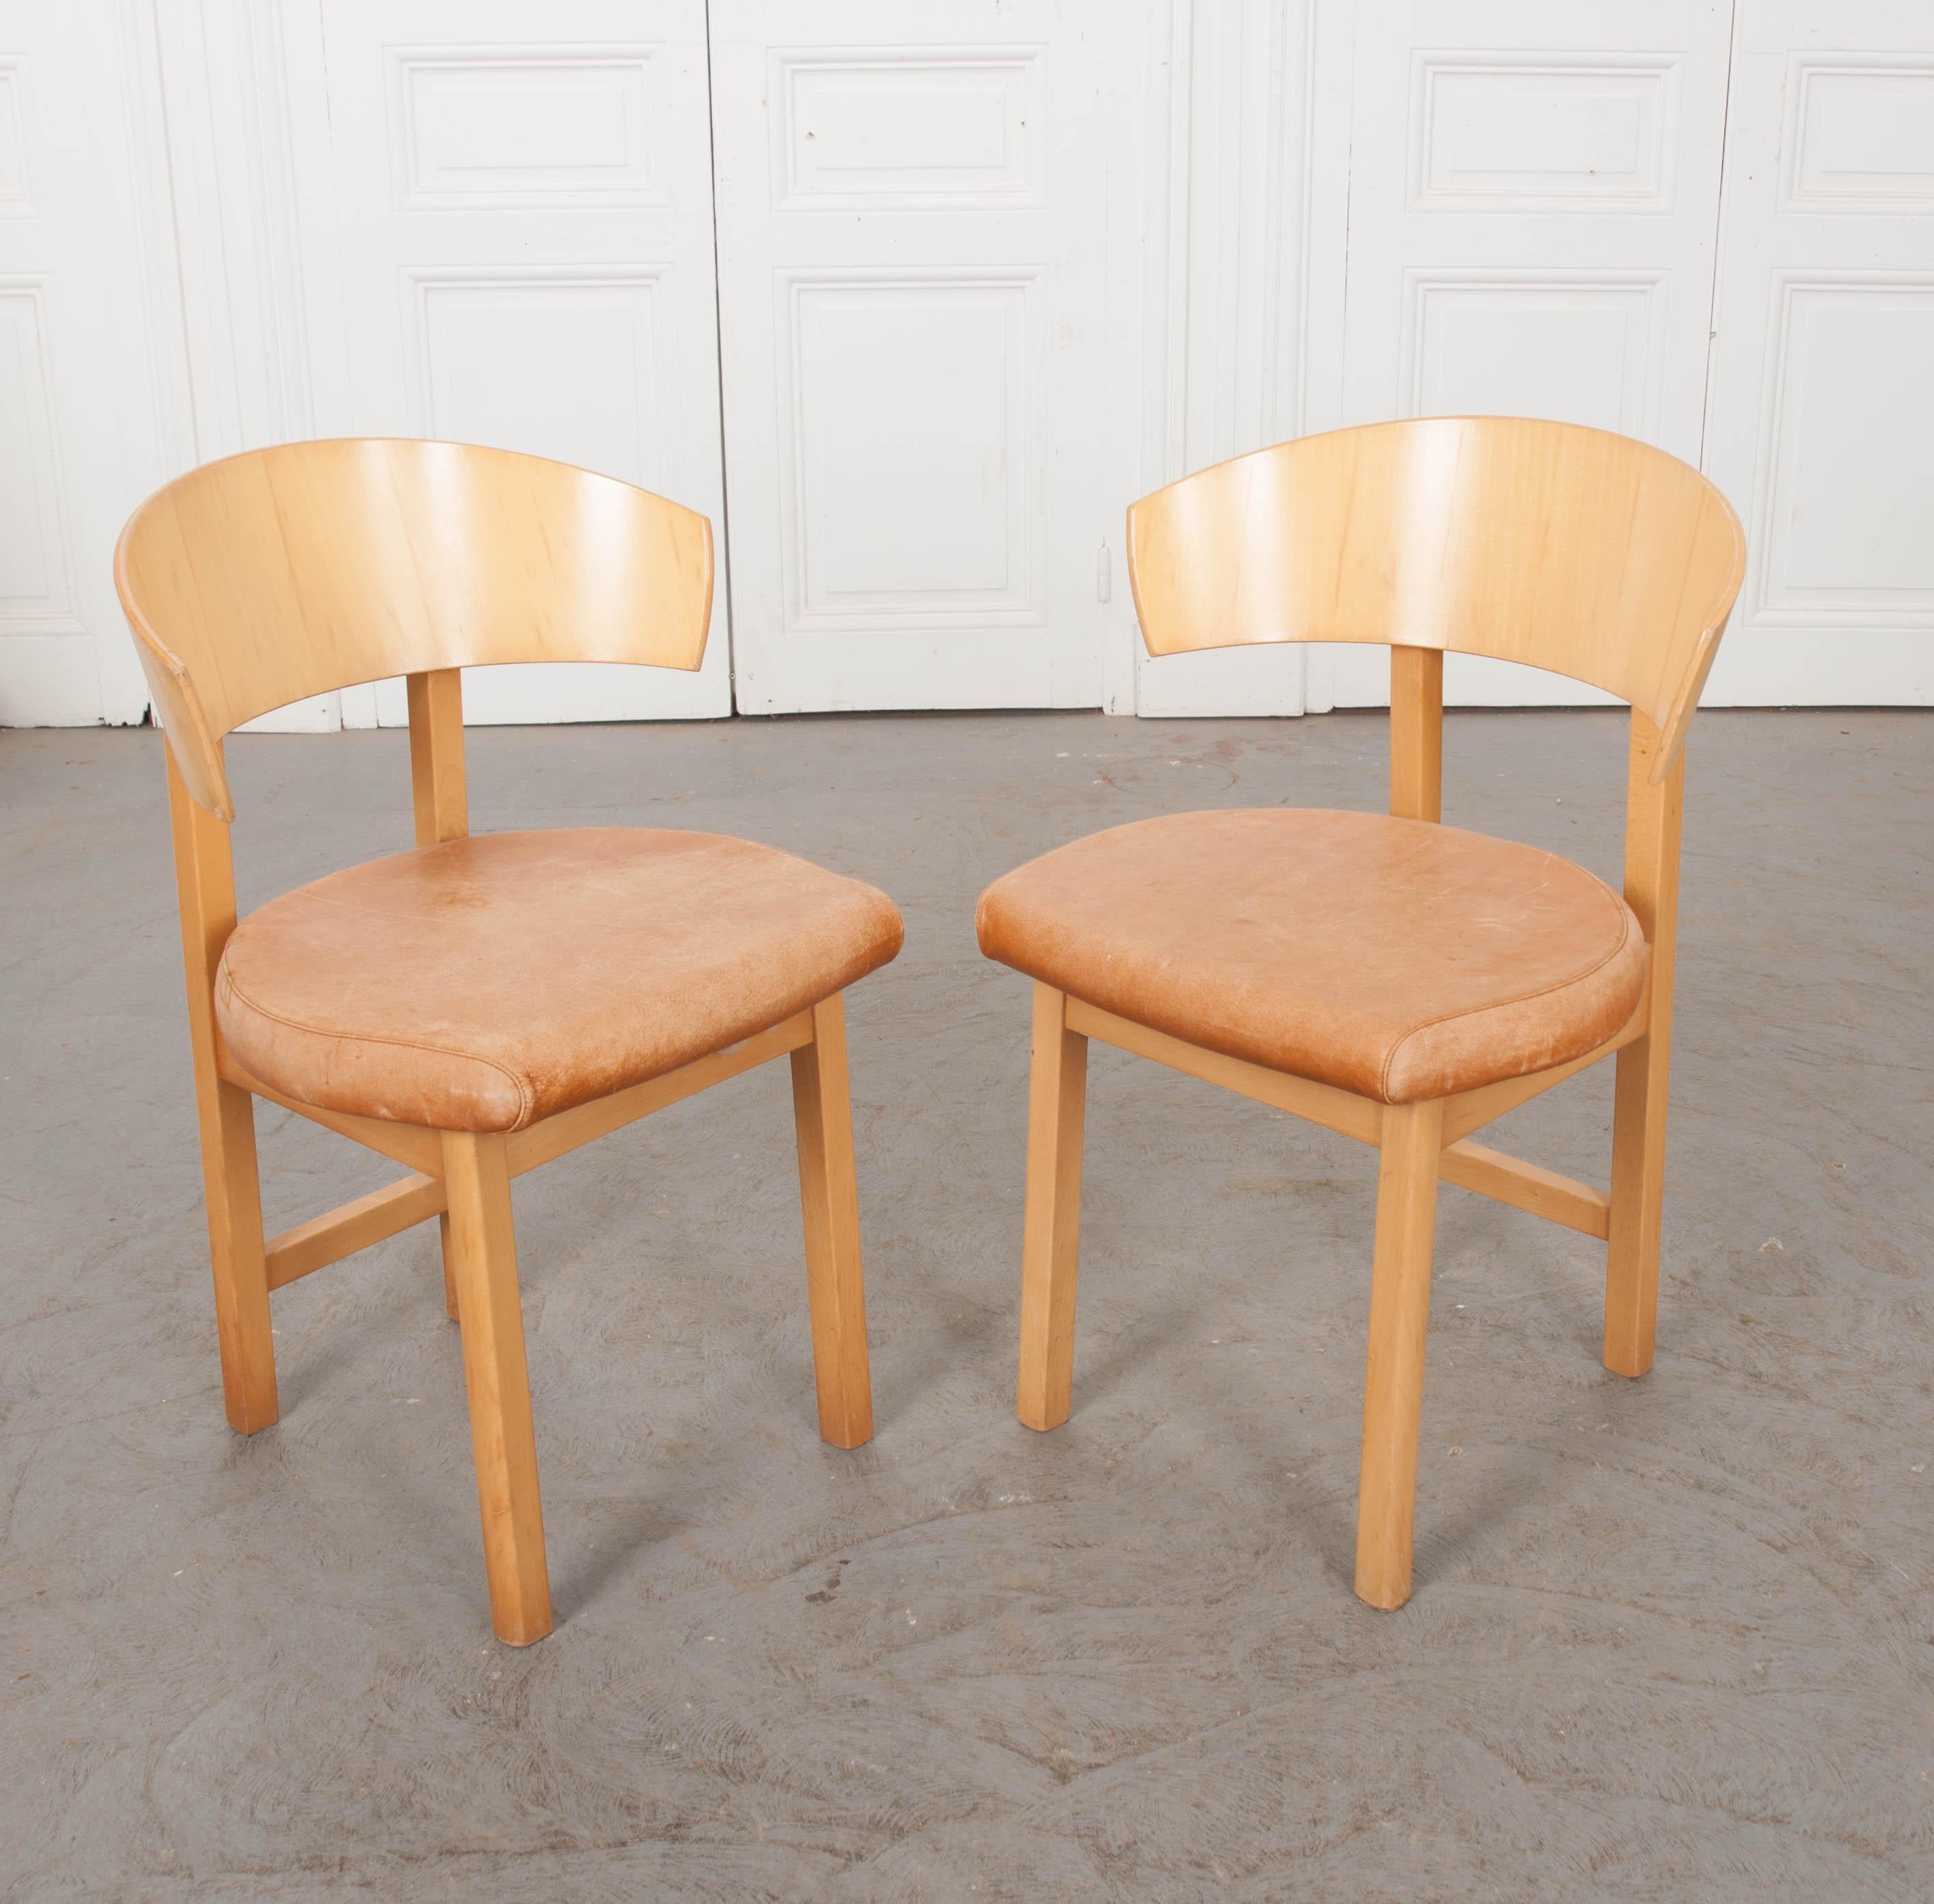 Pair of French Vintage Art Deco-Style Side Chairs 1